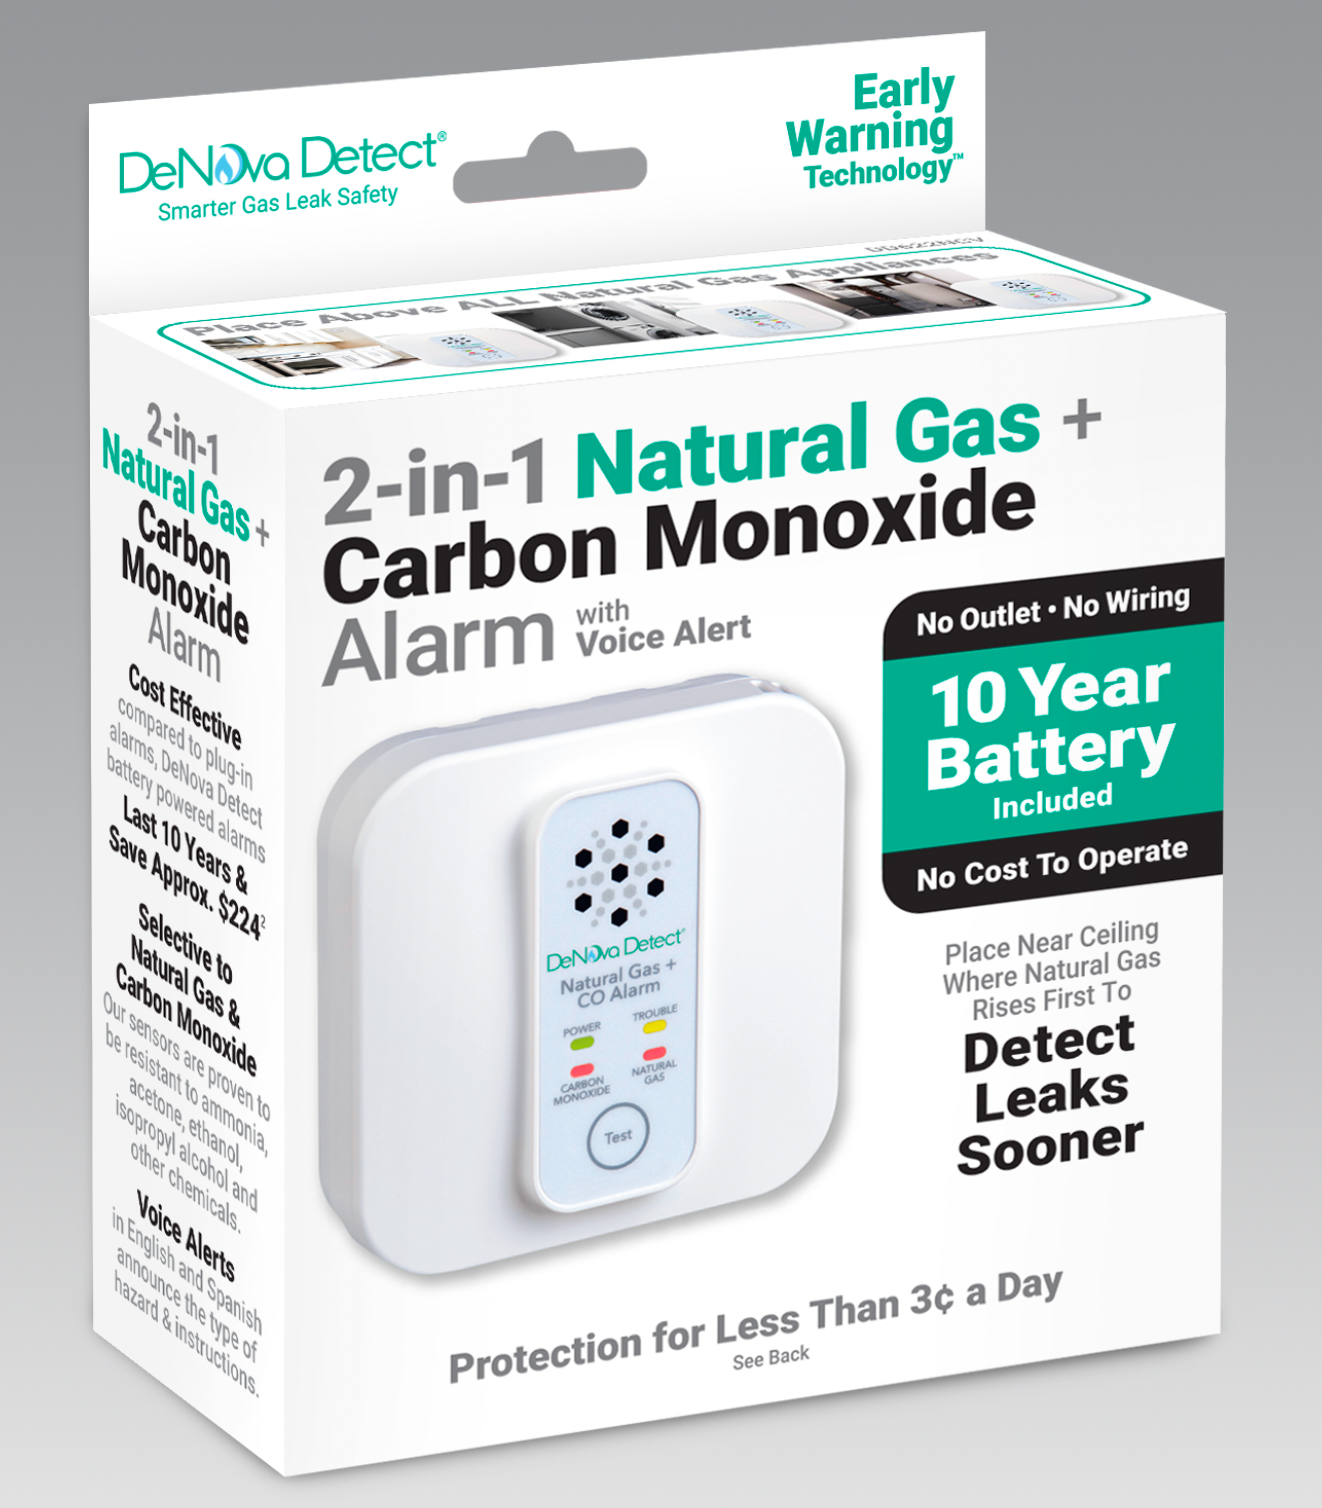 10-Year 100% Battery-Powered Carbon Monoxide + Natural Gas Alarm